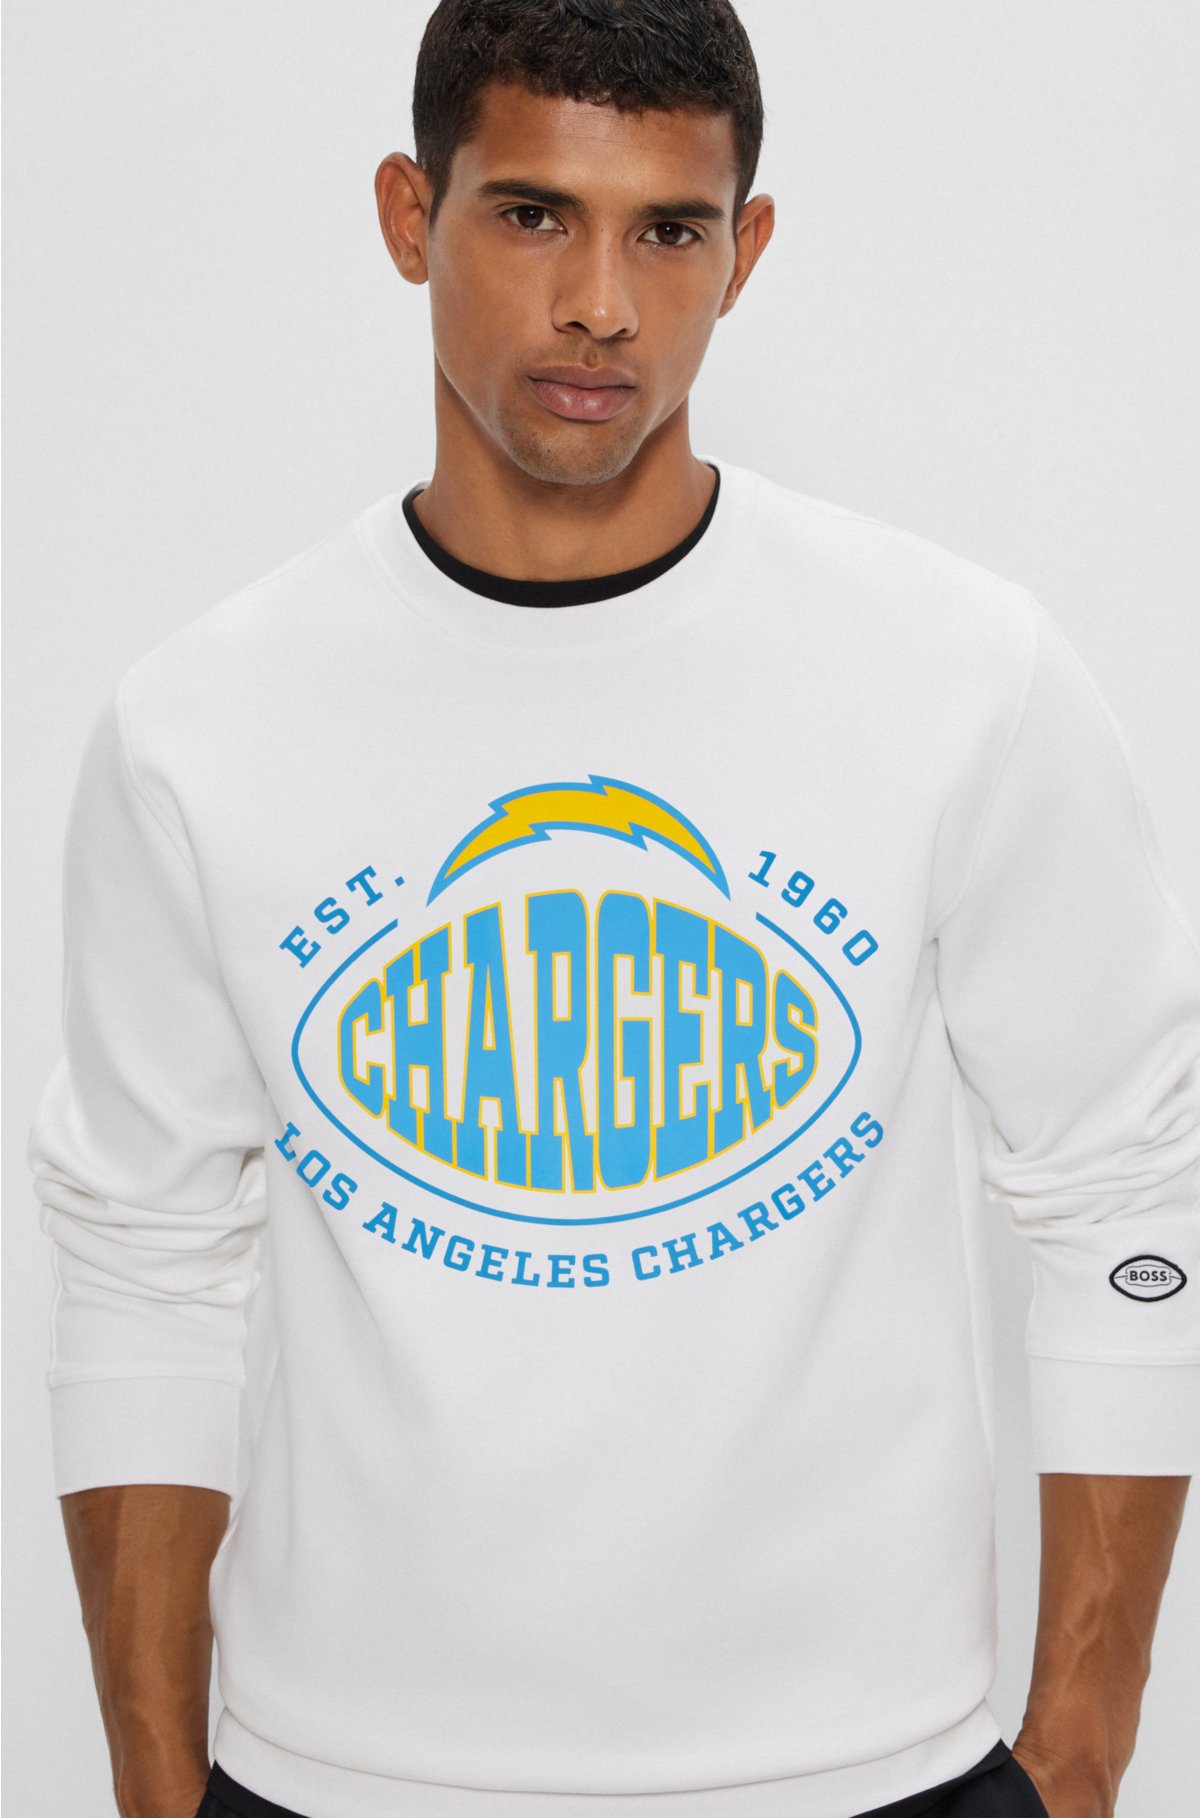 BOSS x NFL cotton-blend sweatshirt with collaborative branding, Chargers